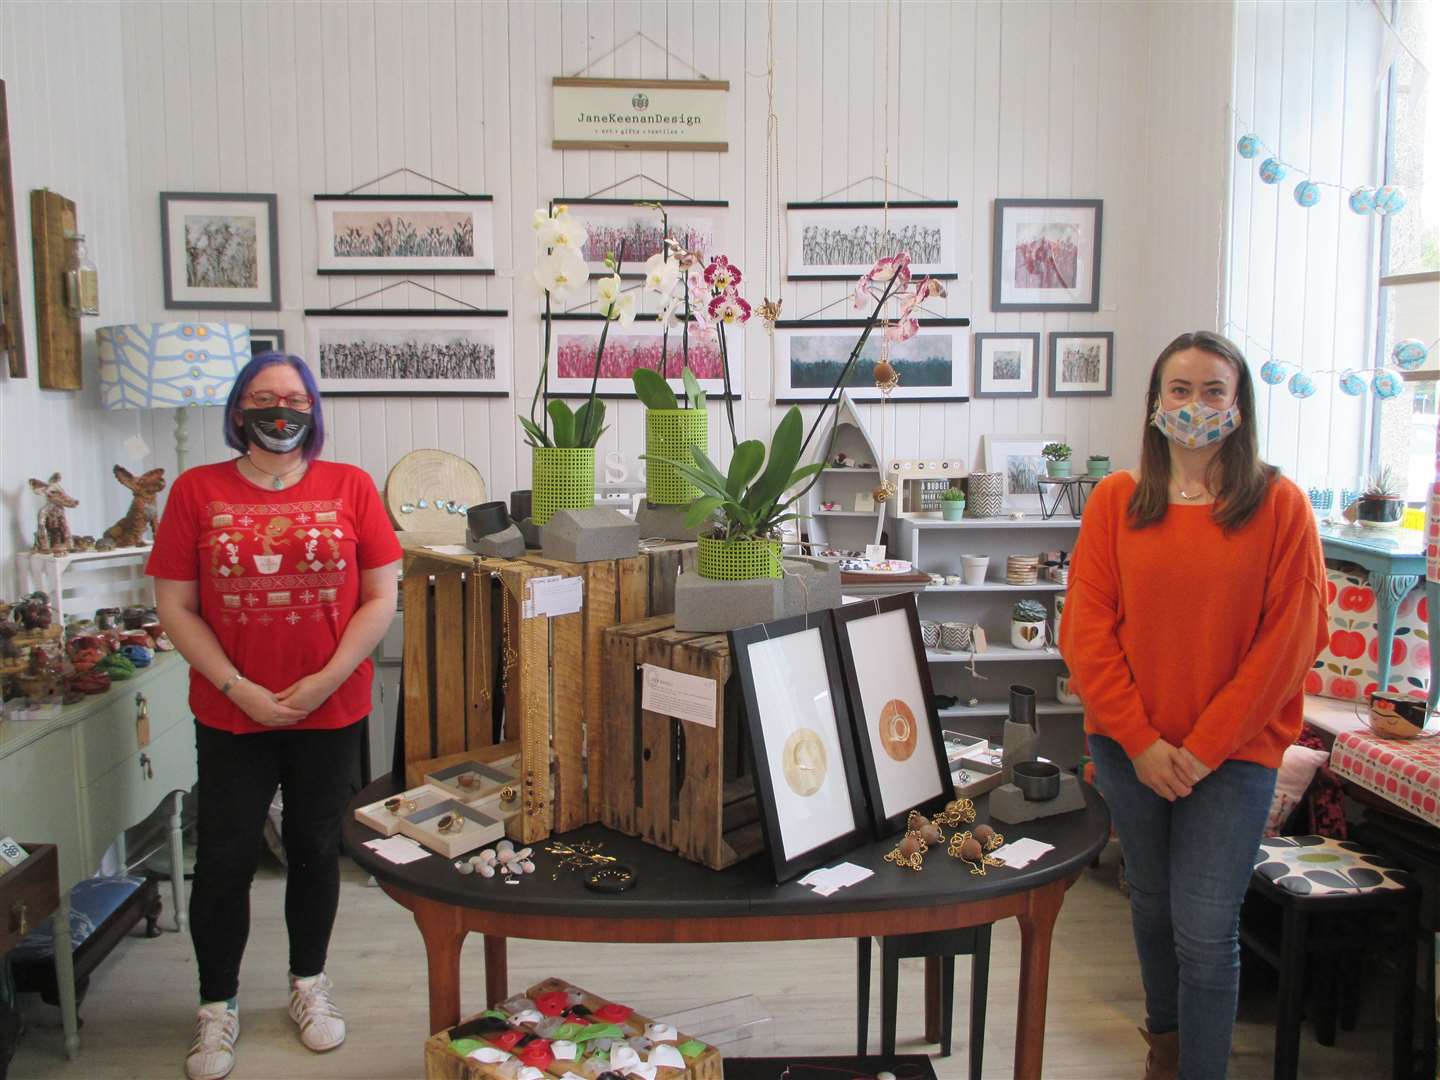 Artists Caroline Gault (left) and Suzanne Munro are exhibiting their work at Jane Keenan Design in Maud.